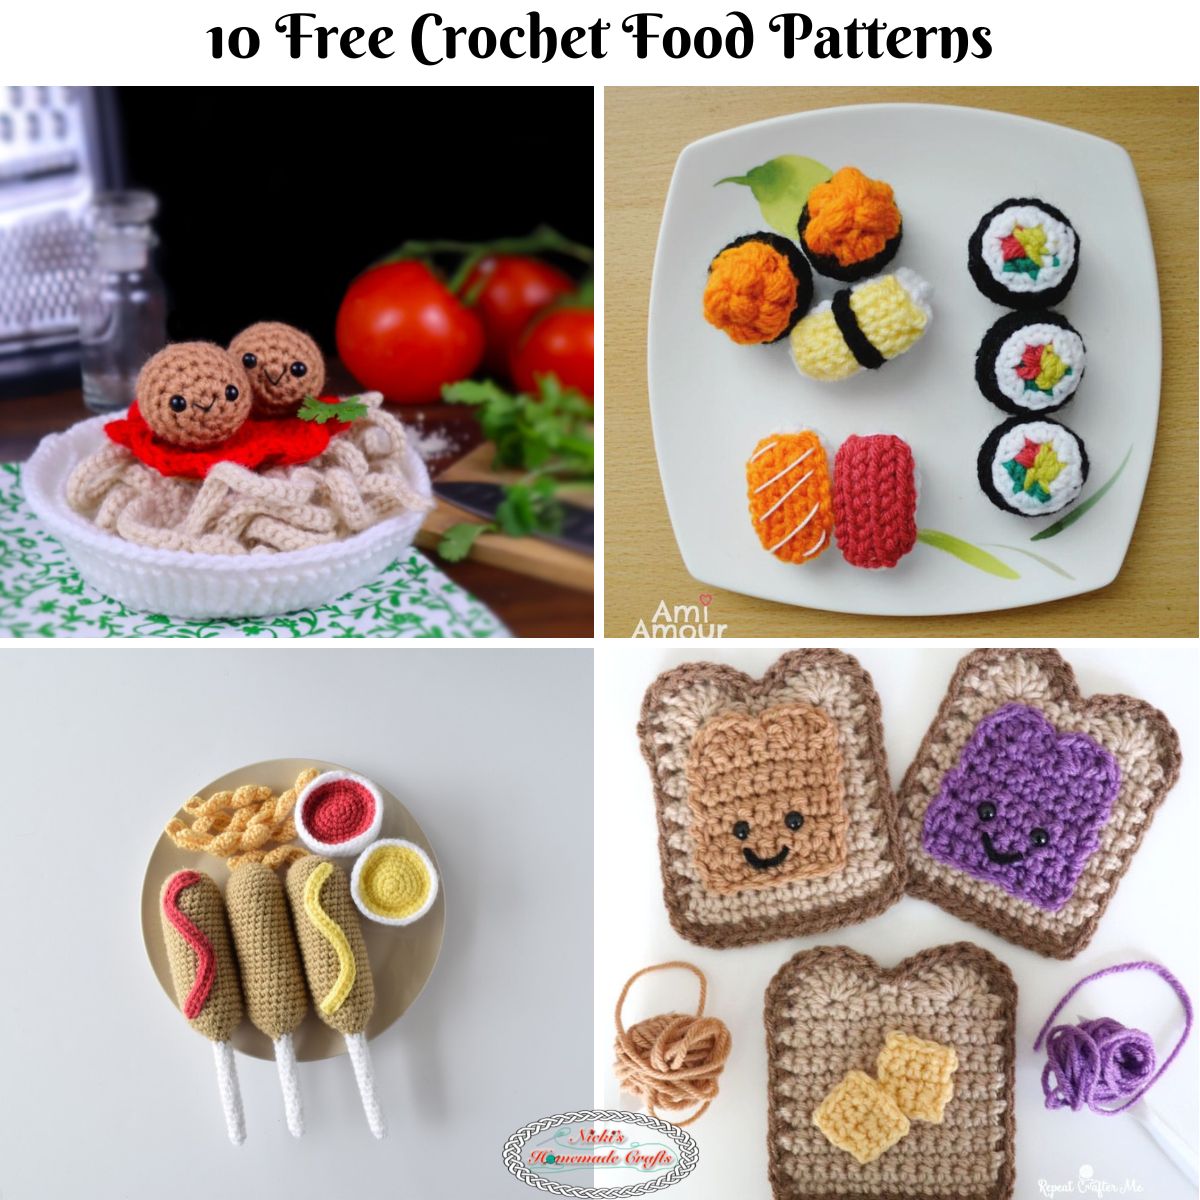 10 FREE Delicious Crochet Food Patterns - Nicki's Homemade Crafts